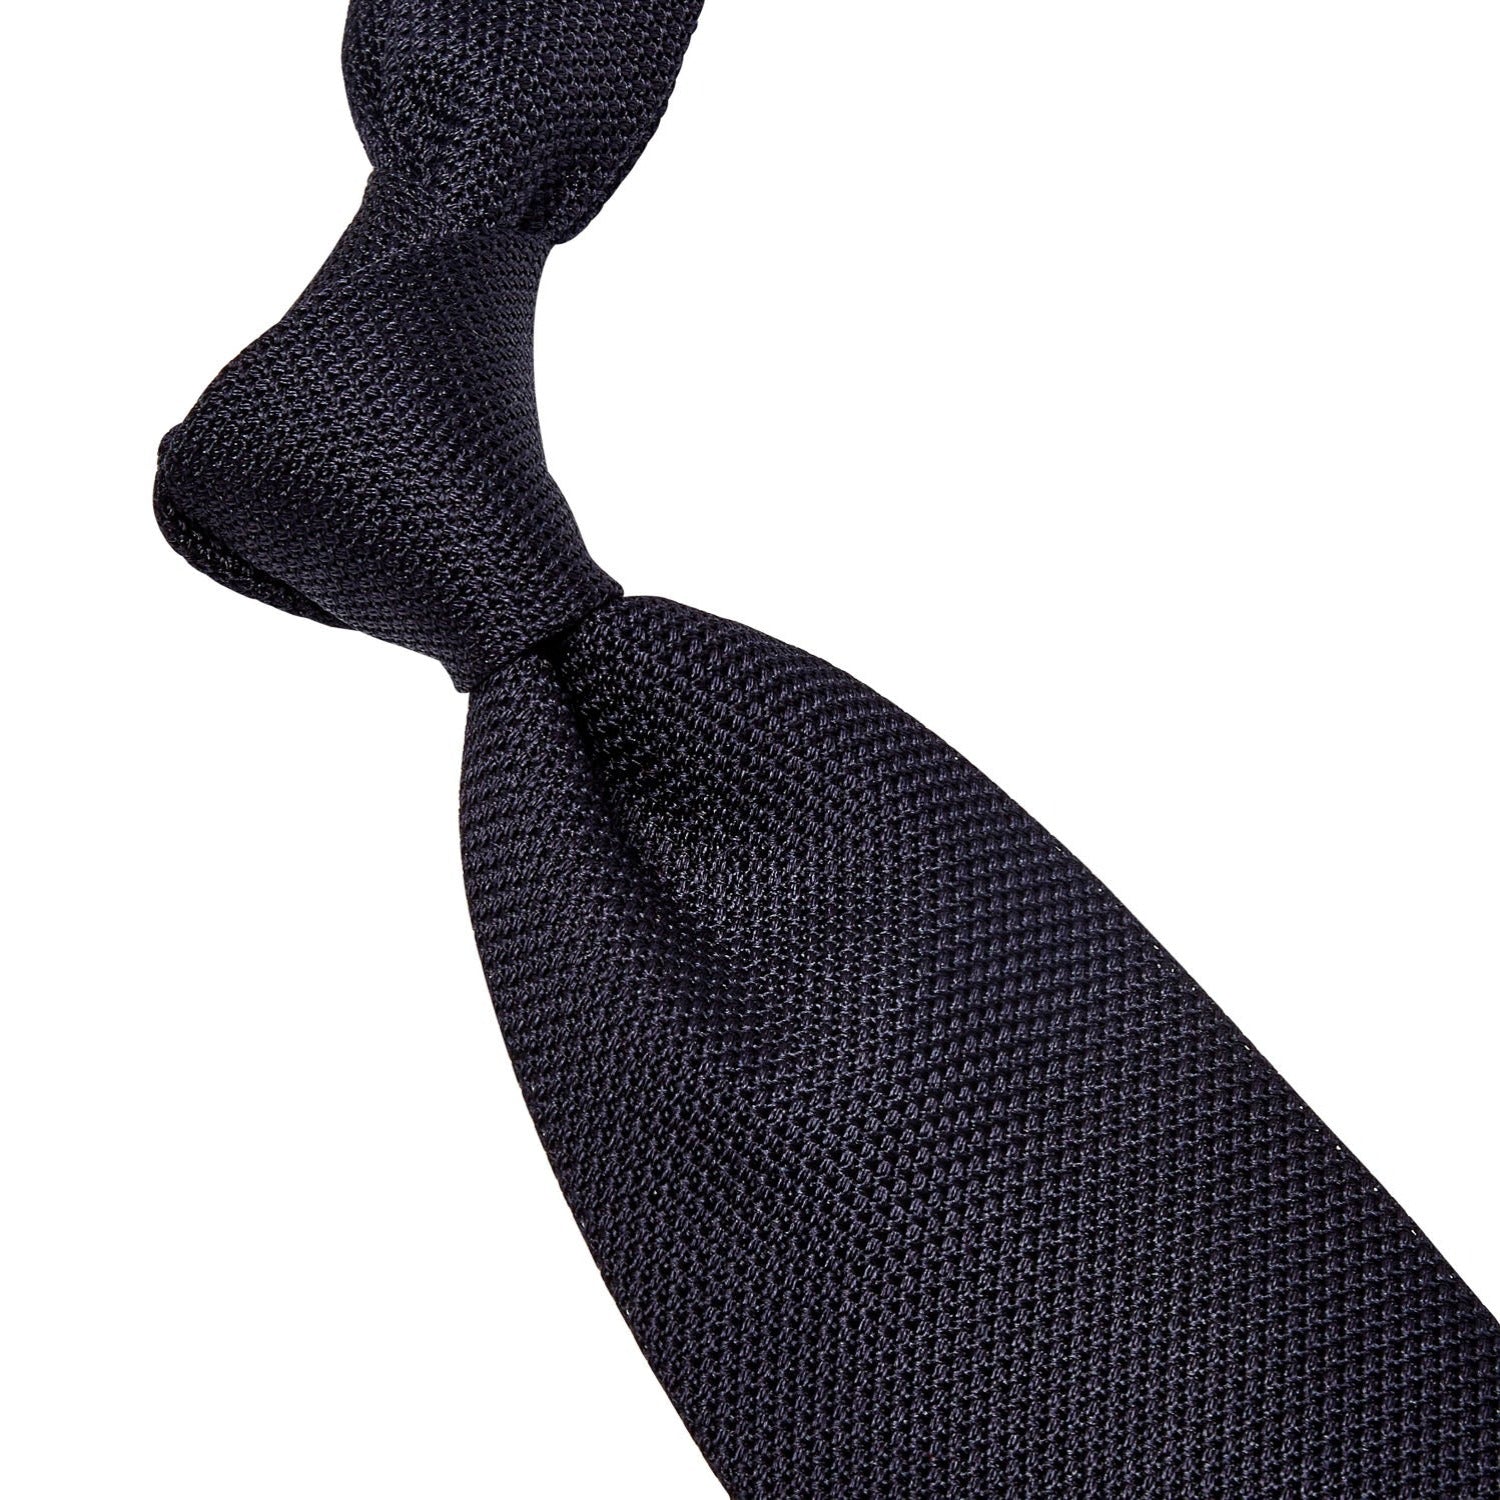 High-quality Sovereign Grade Grenadine Fina Midnight Tie from KirbyAllison.com on a white background.